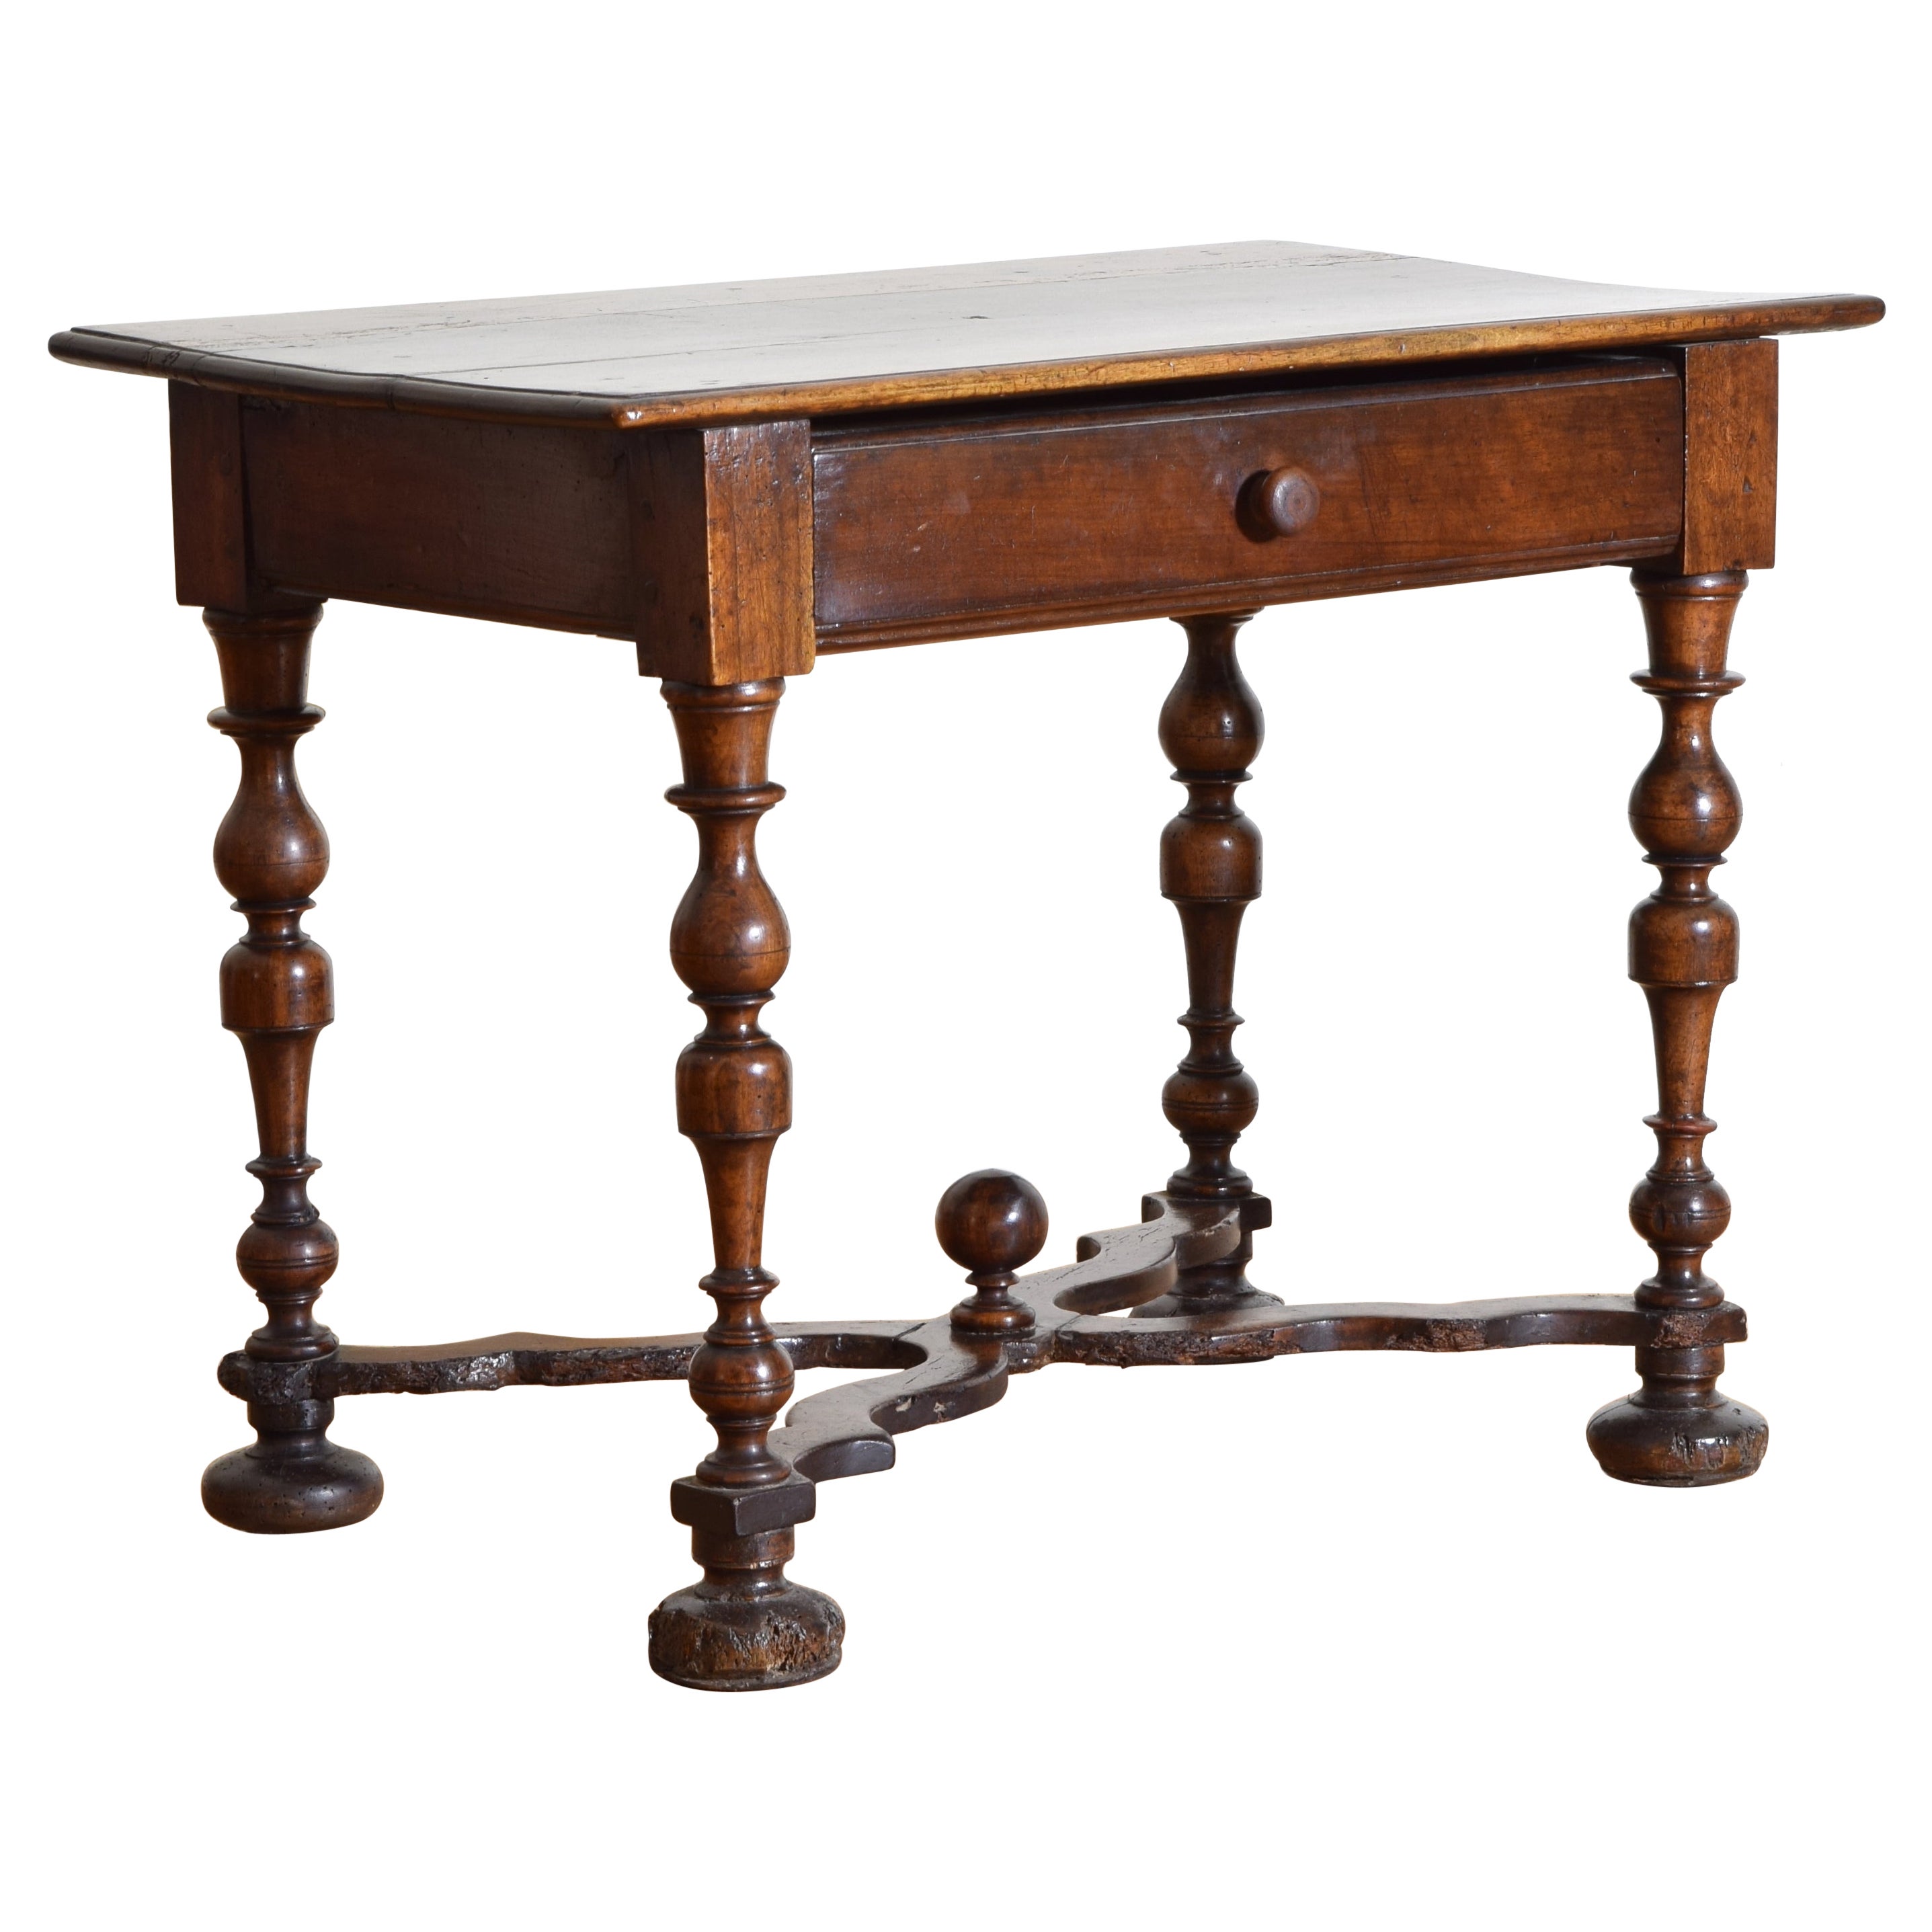 French Louis XIV Period Shaped Walnut 1-Drawer Table, 1st quarter 18th century